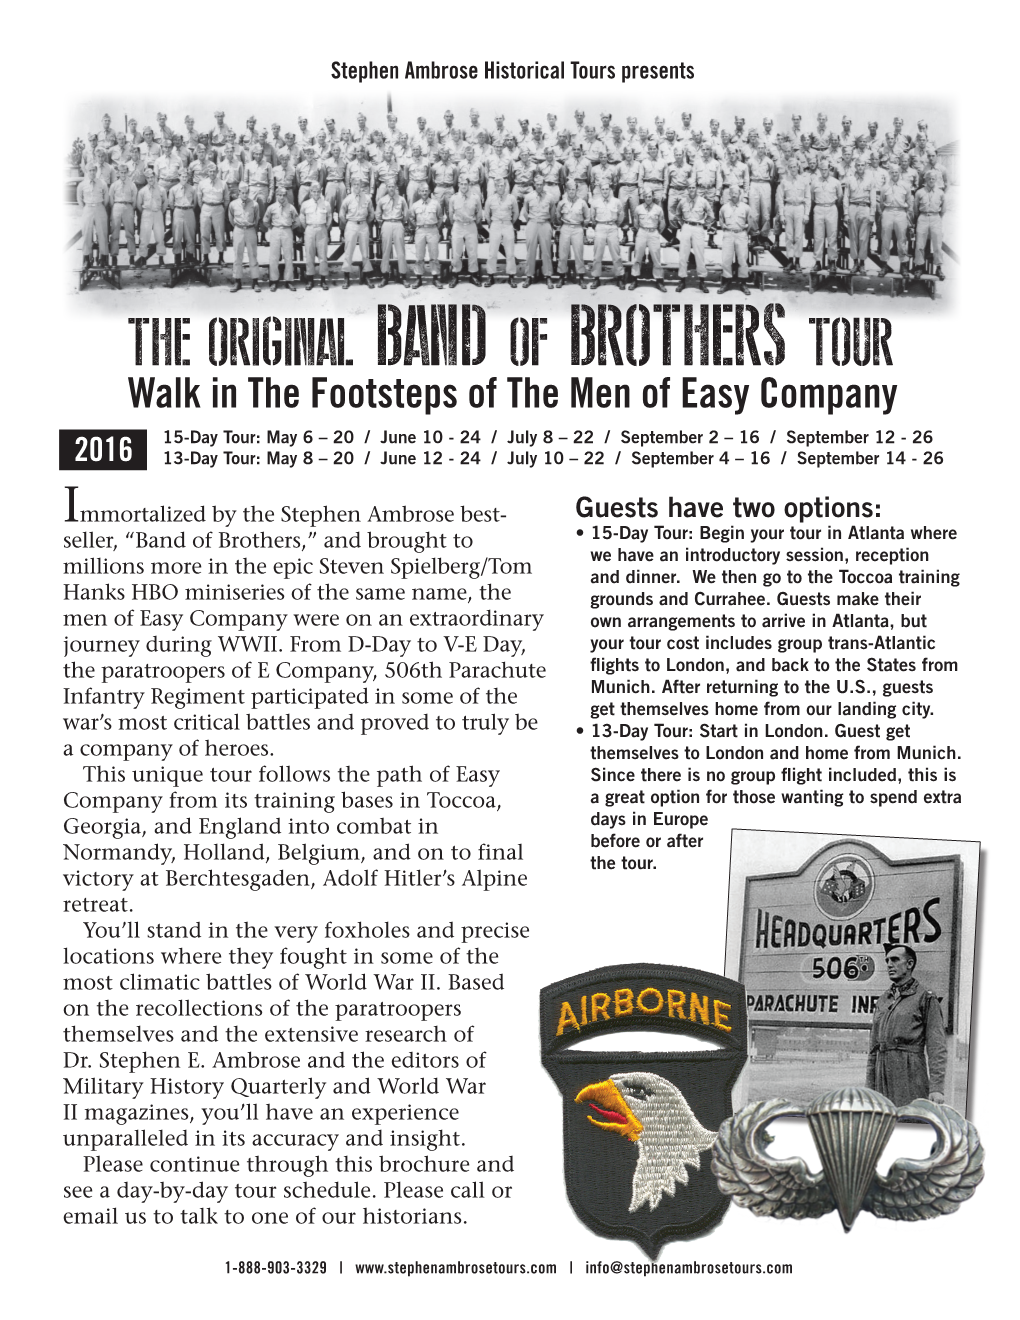 The Original Band of Brothers Tour